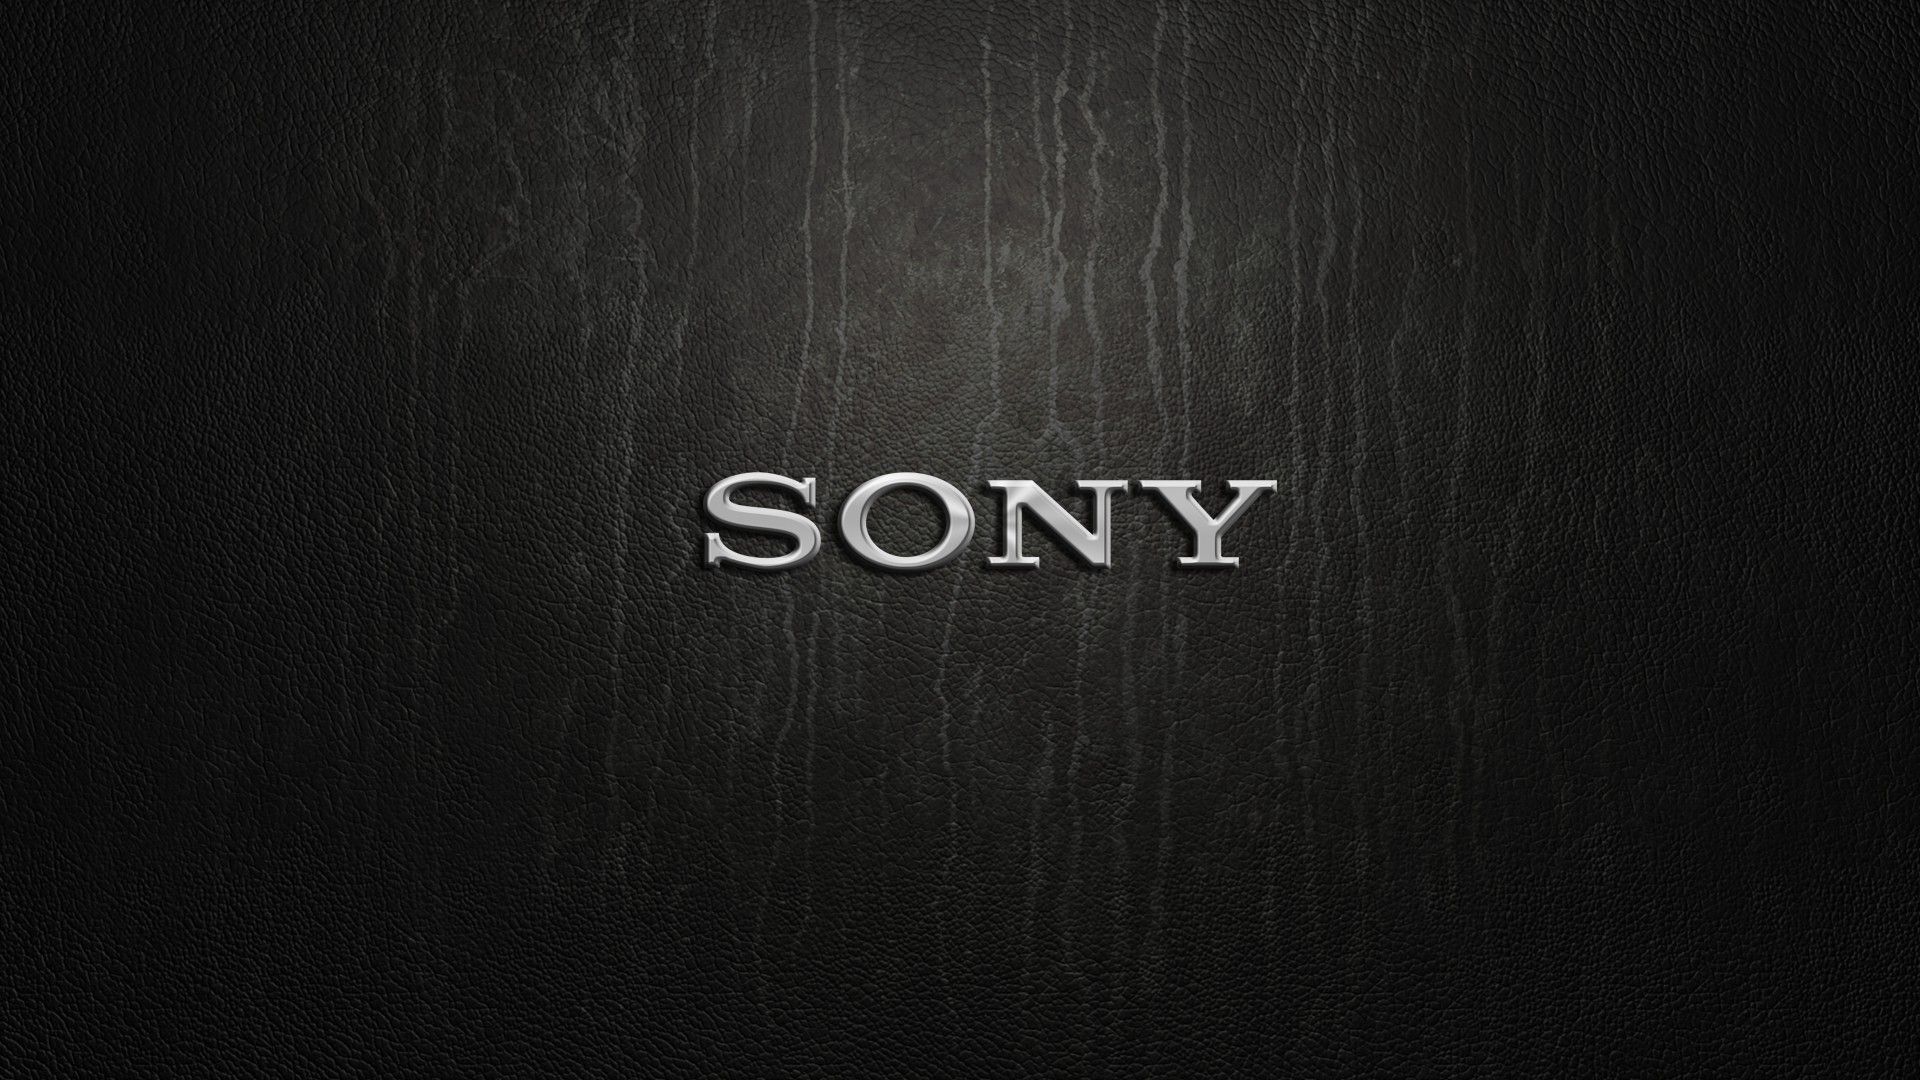 Sony Tv Wallpapers